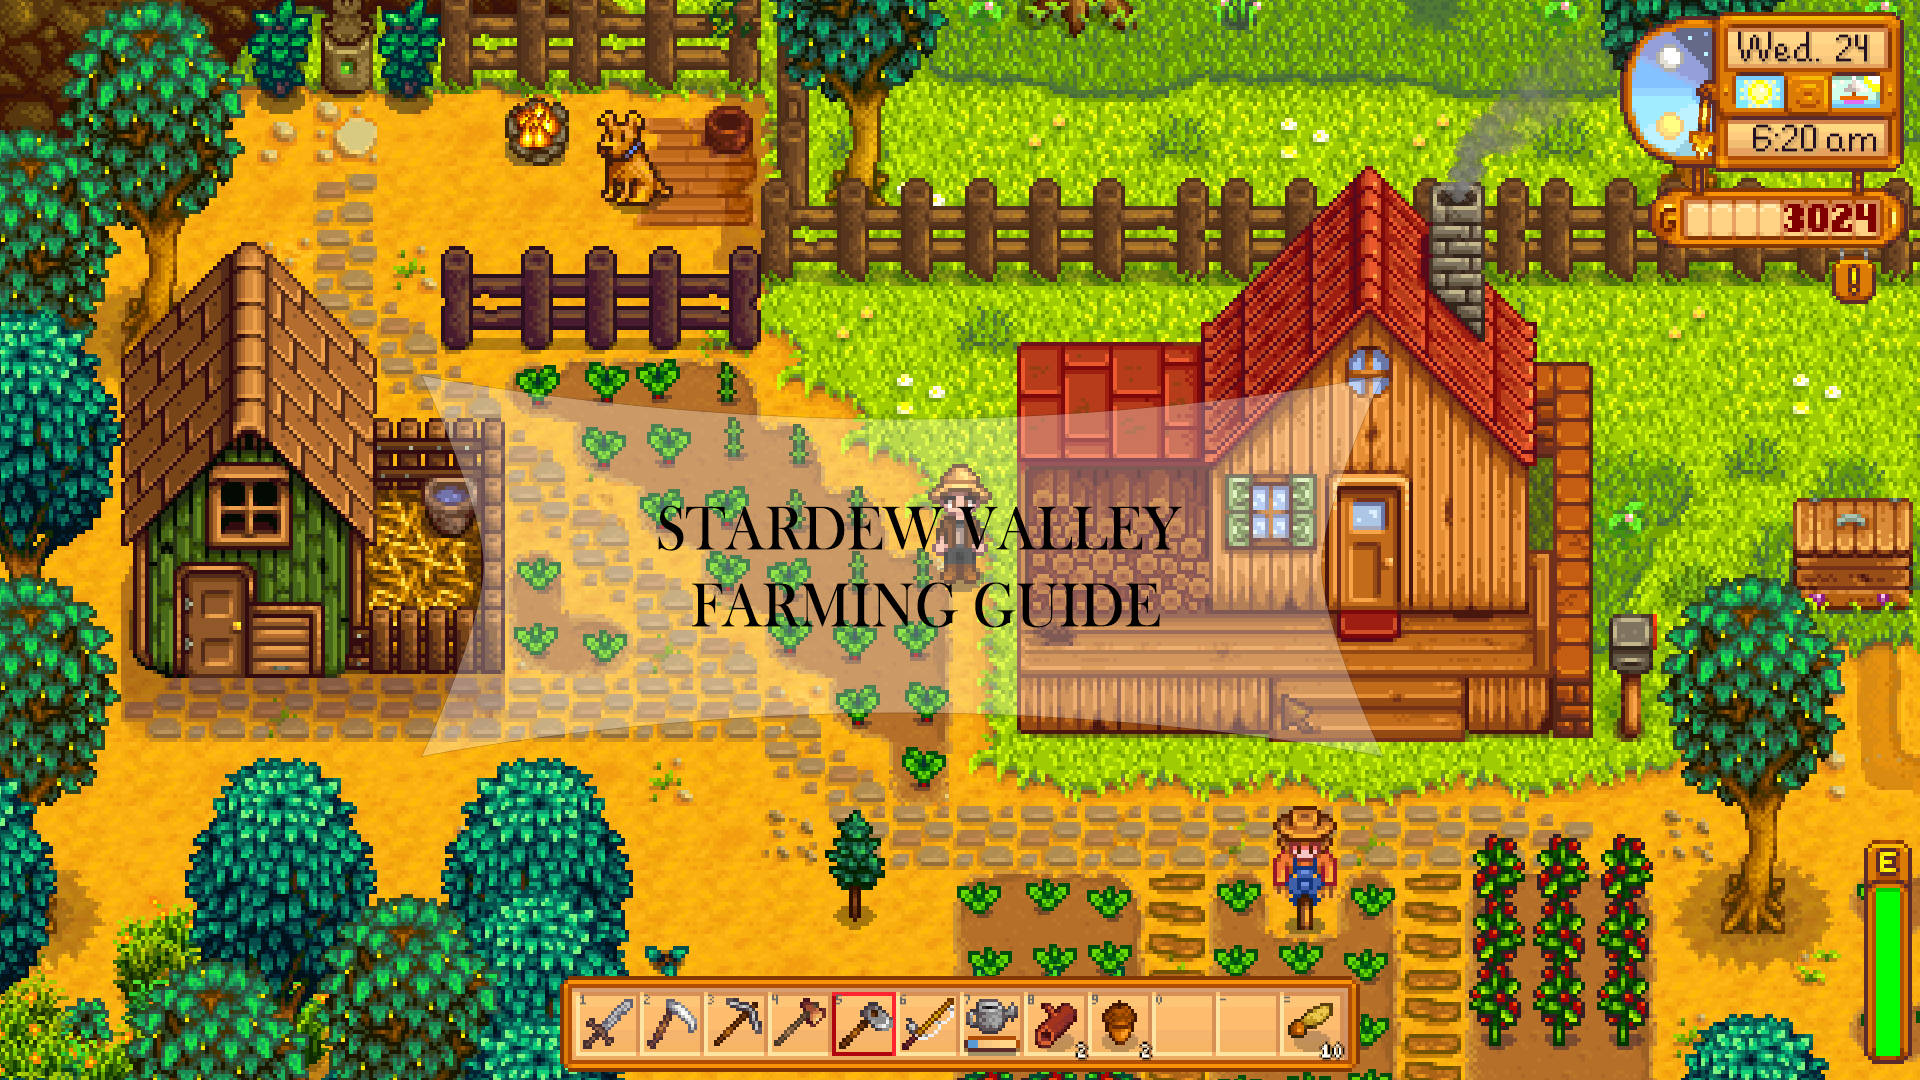 Stardew Valley Farming Guide Interface Background